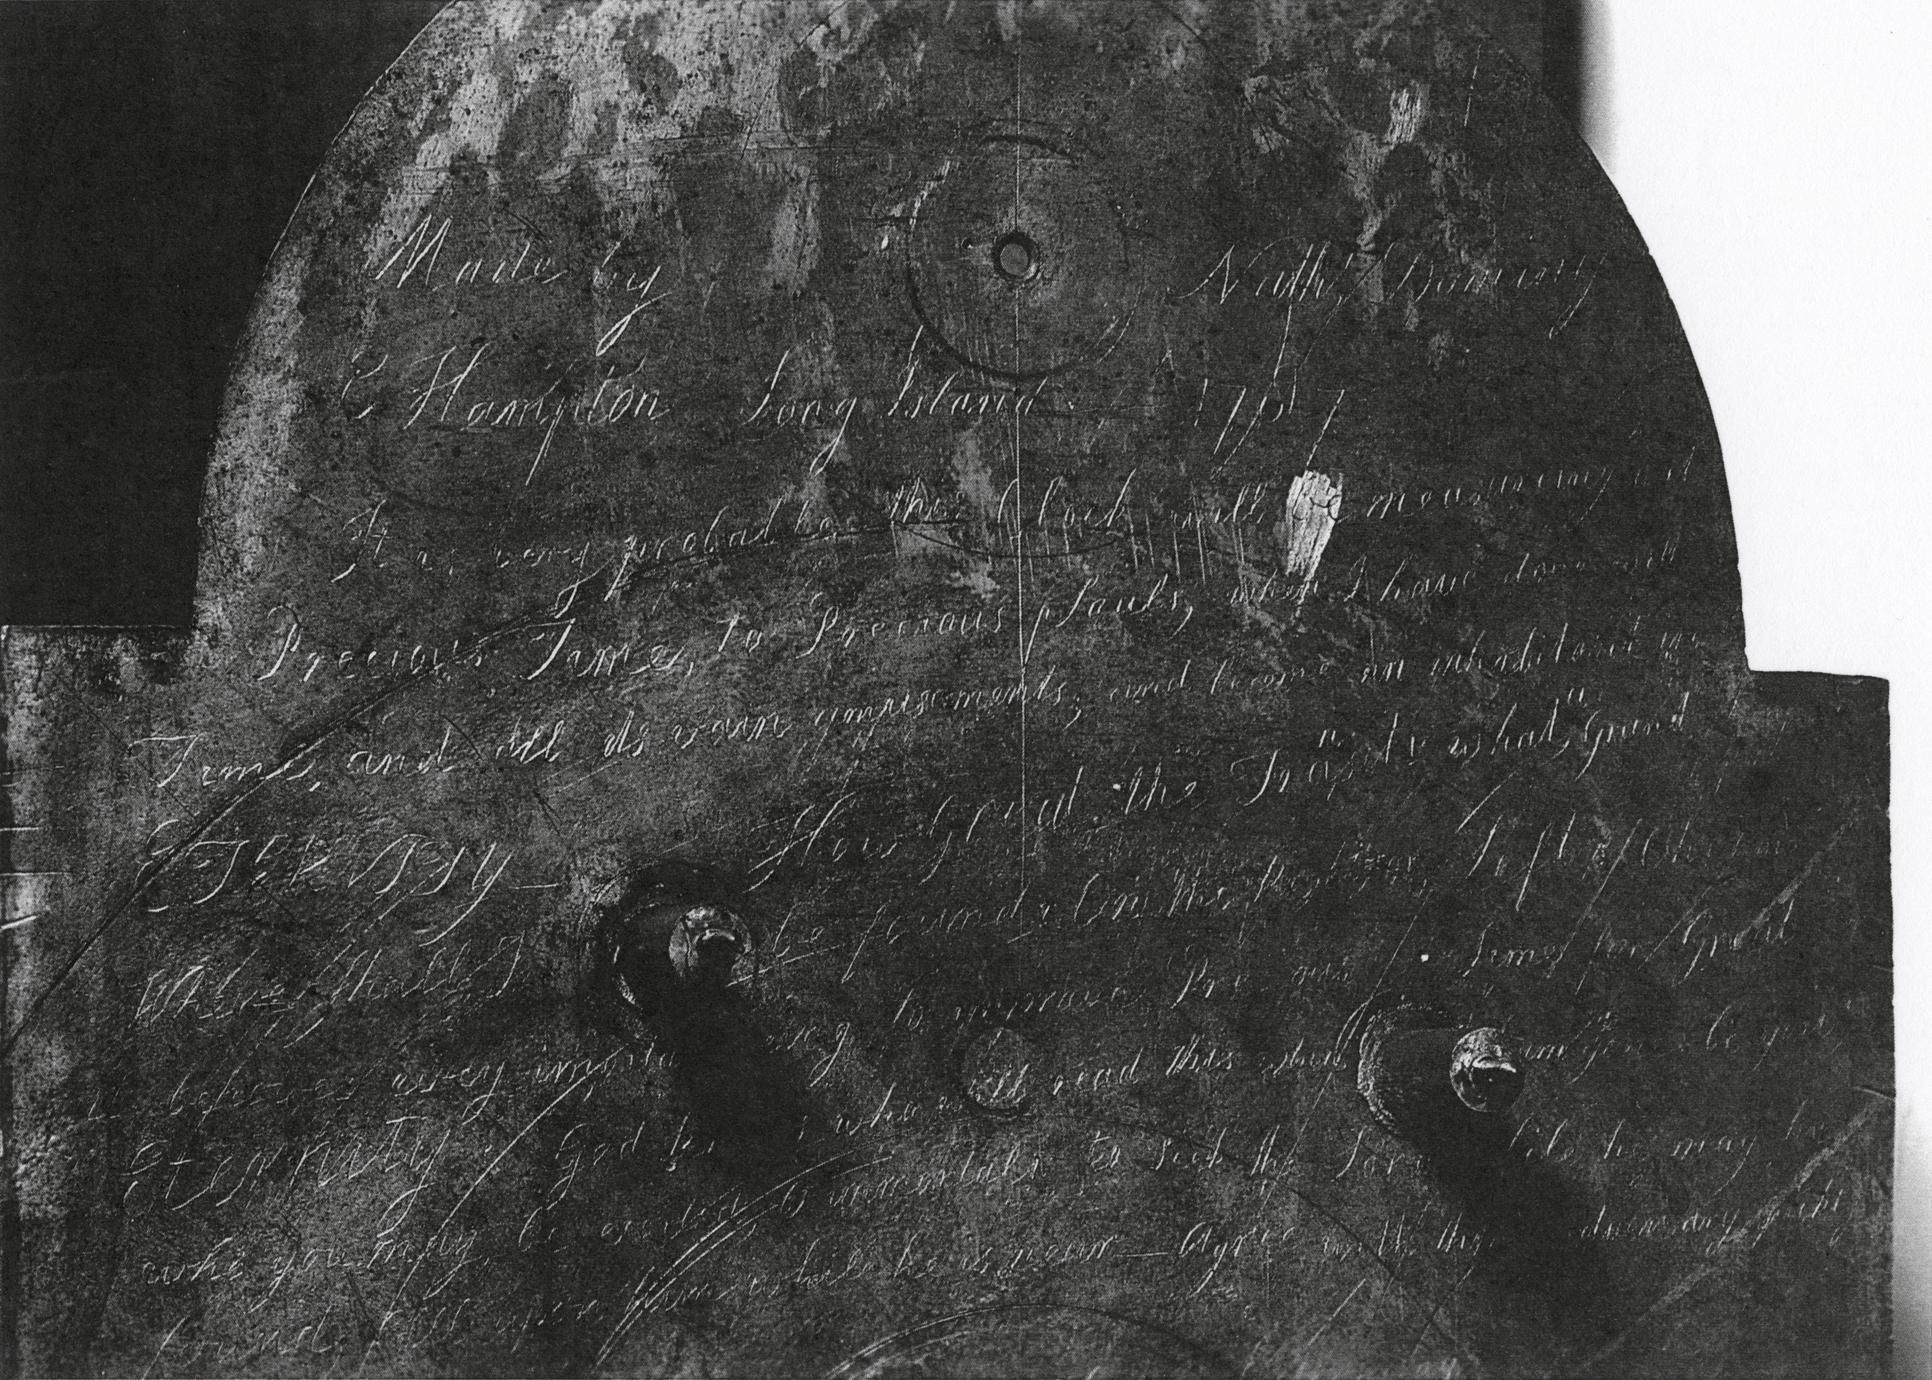 Black and white photograph of the inscription on the back of the clock.